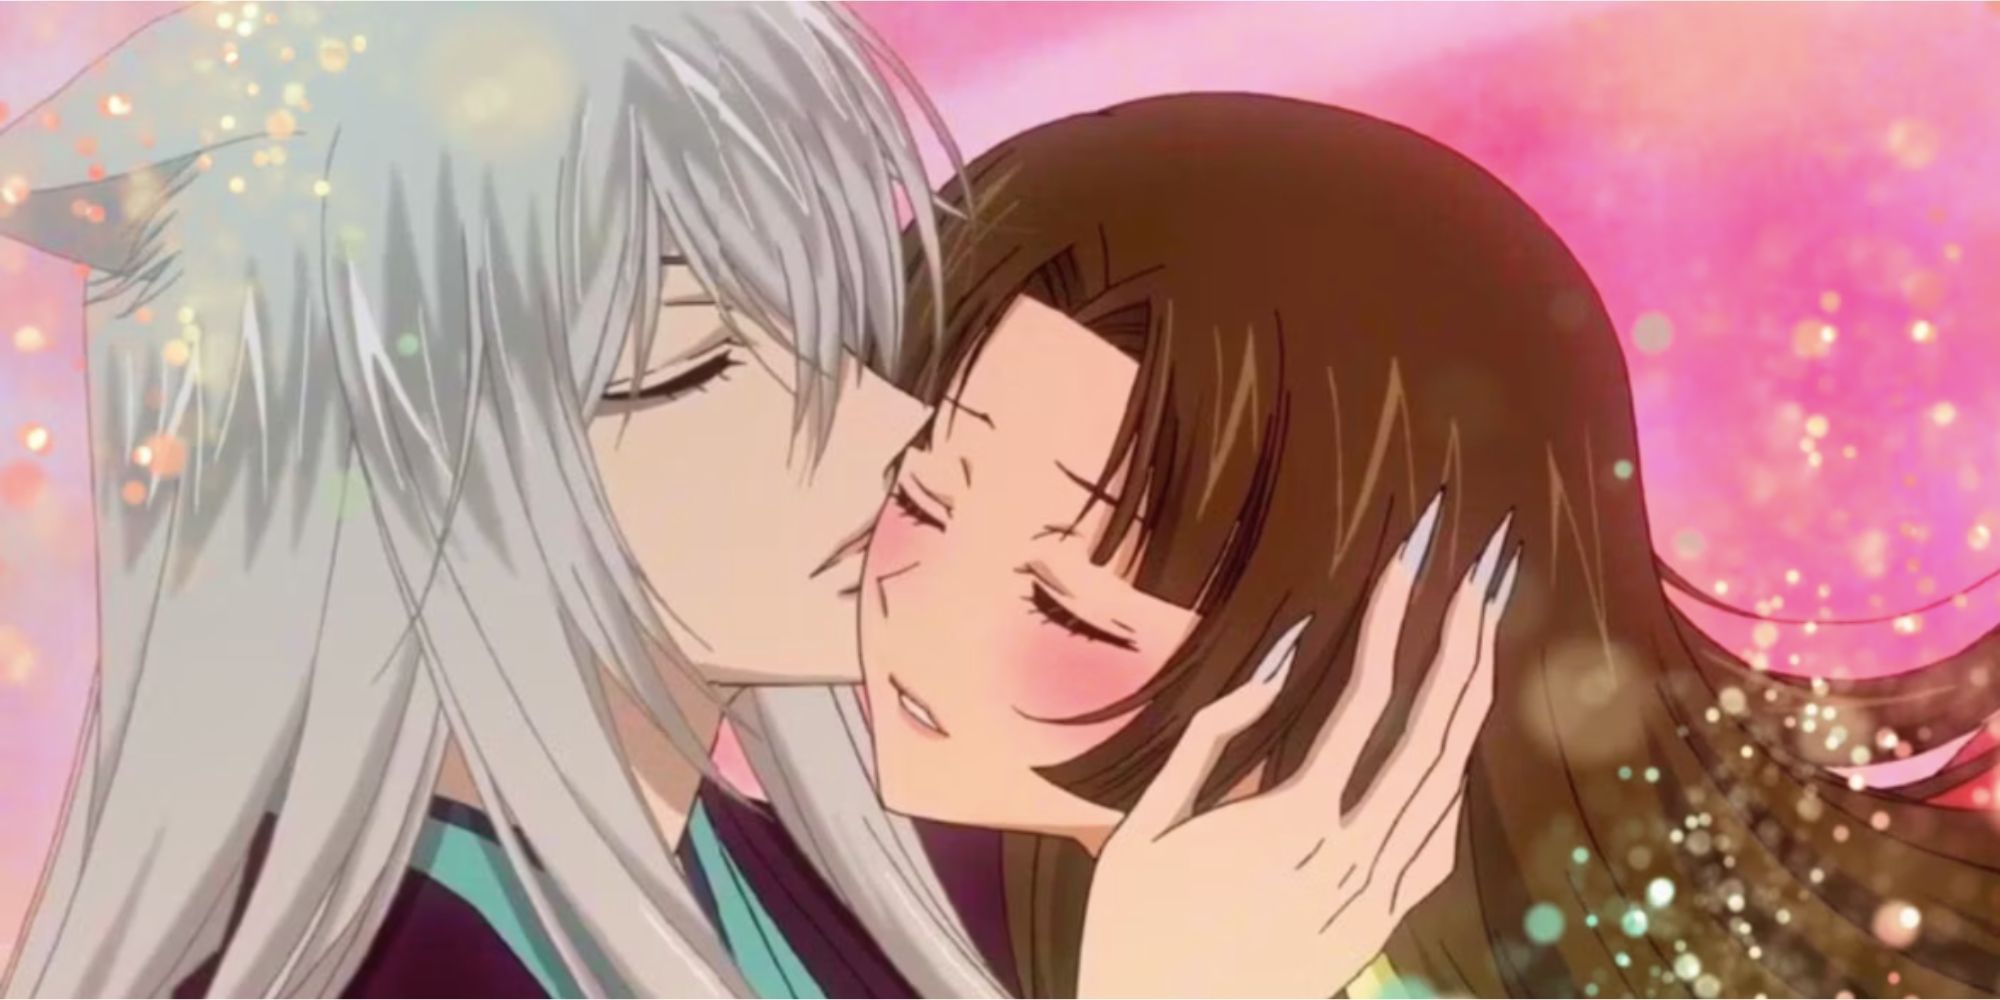 a white haired man with fox ears kisses a brunette girl